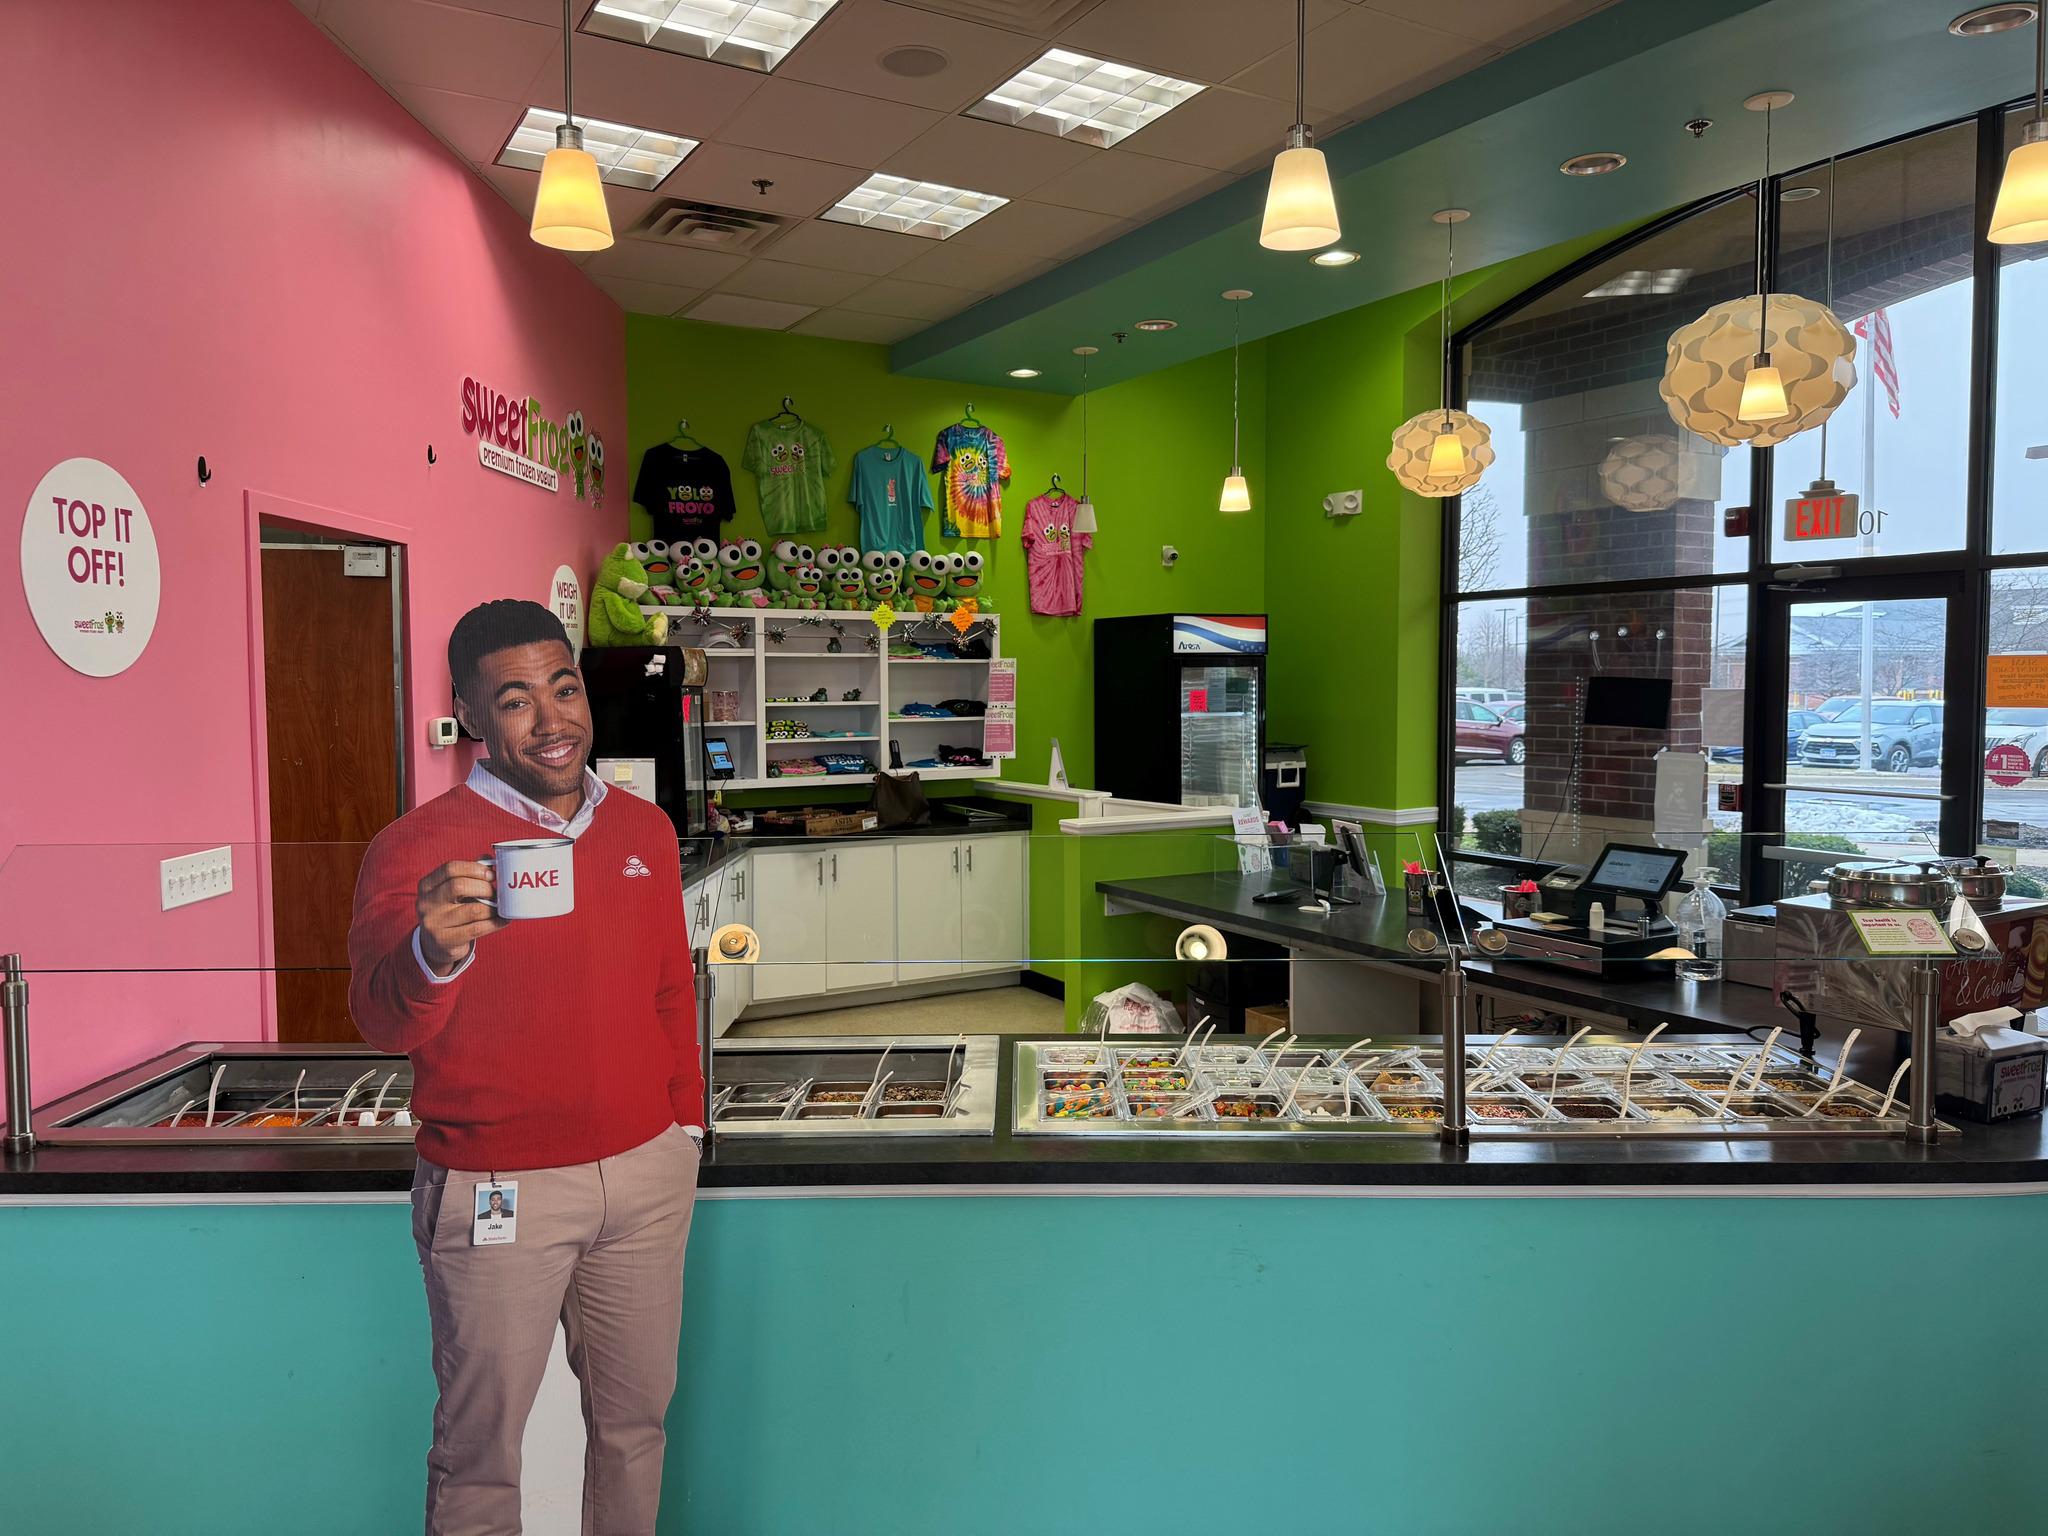 Where's Jake?!
February 2024
Sweet Frog in Frankfort, IL
Jake has been waiting all month for his FroYo 🍨  
Also celebrating National Frozen Yogurt Day!